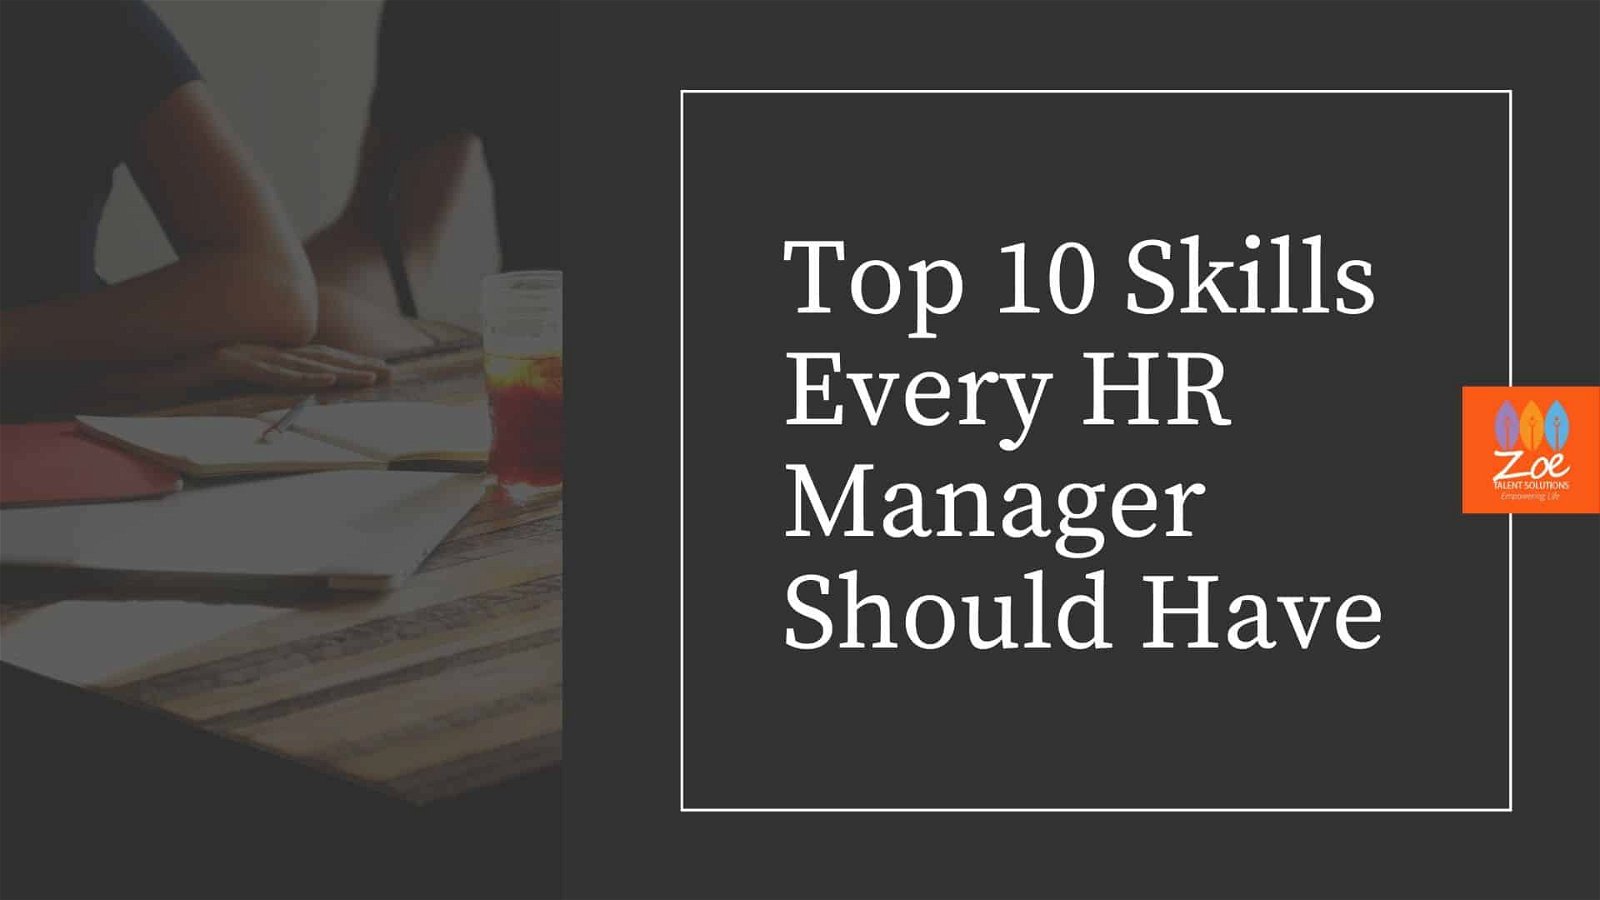 Top 10 Skills Every HR Manager Should Have | Zoe Talent Solutions